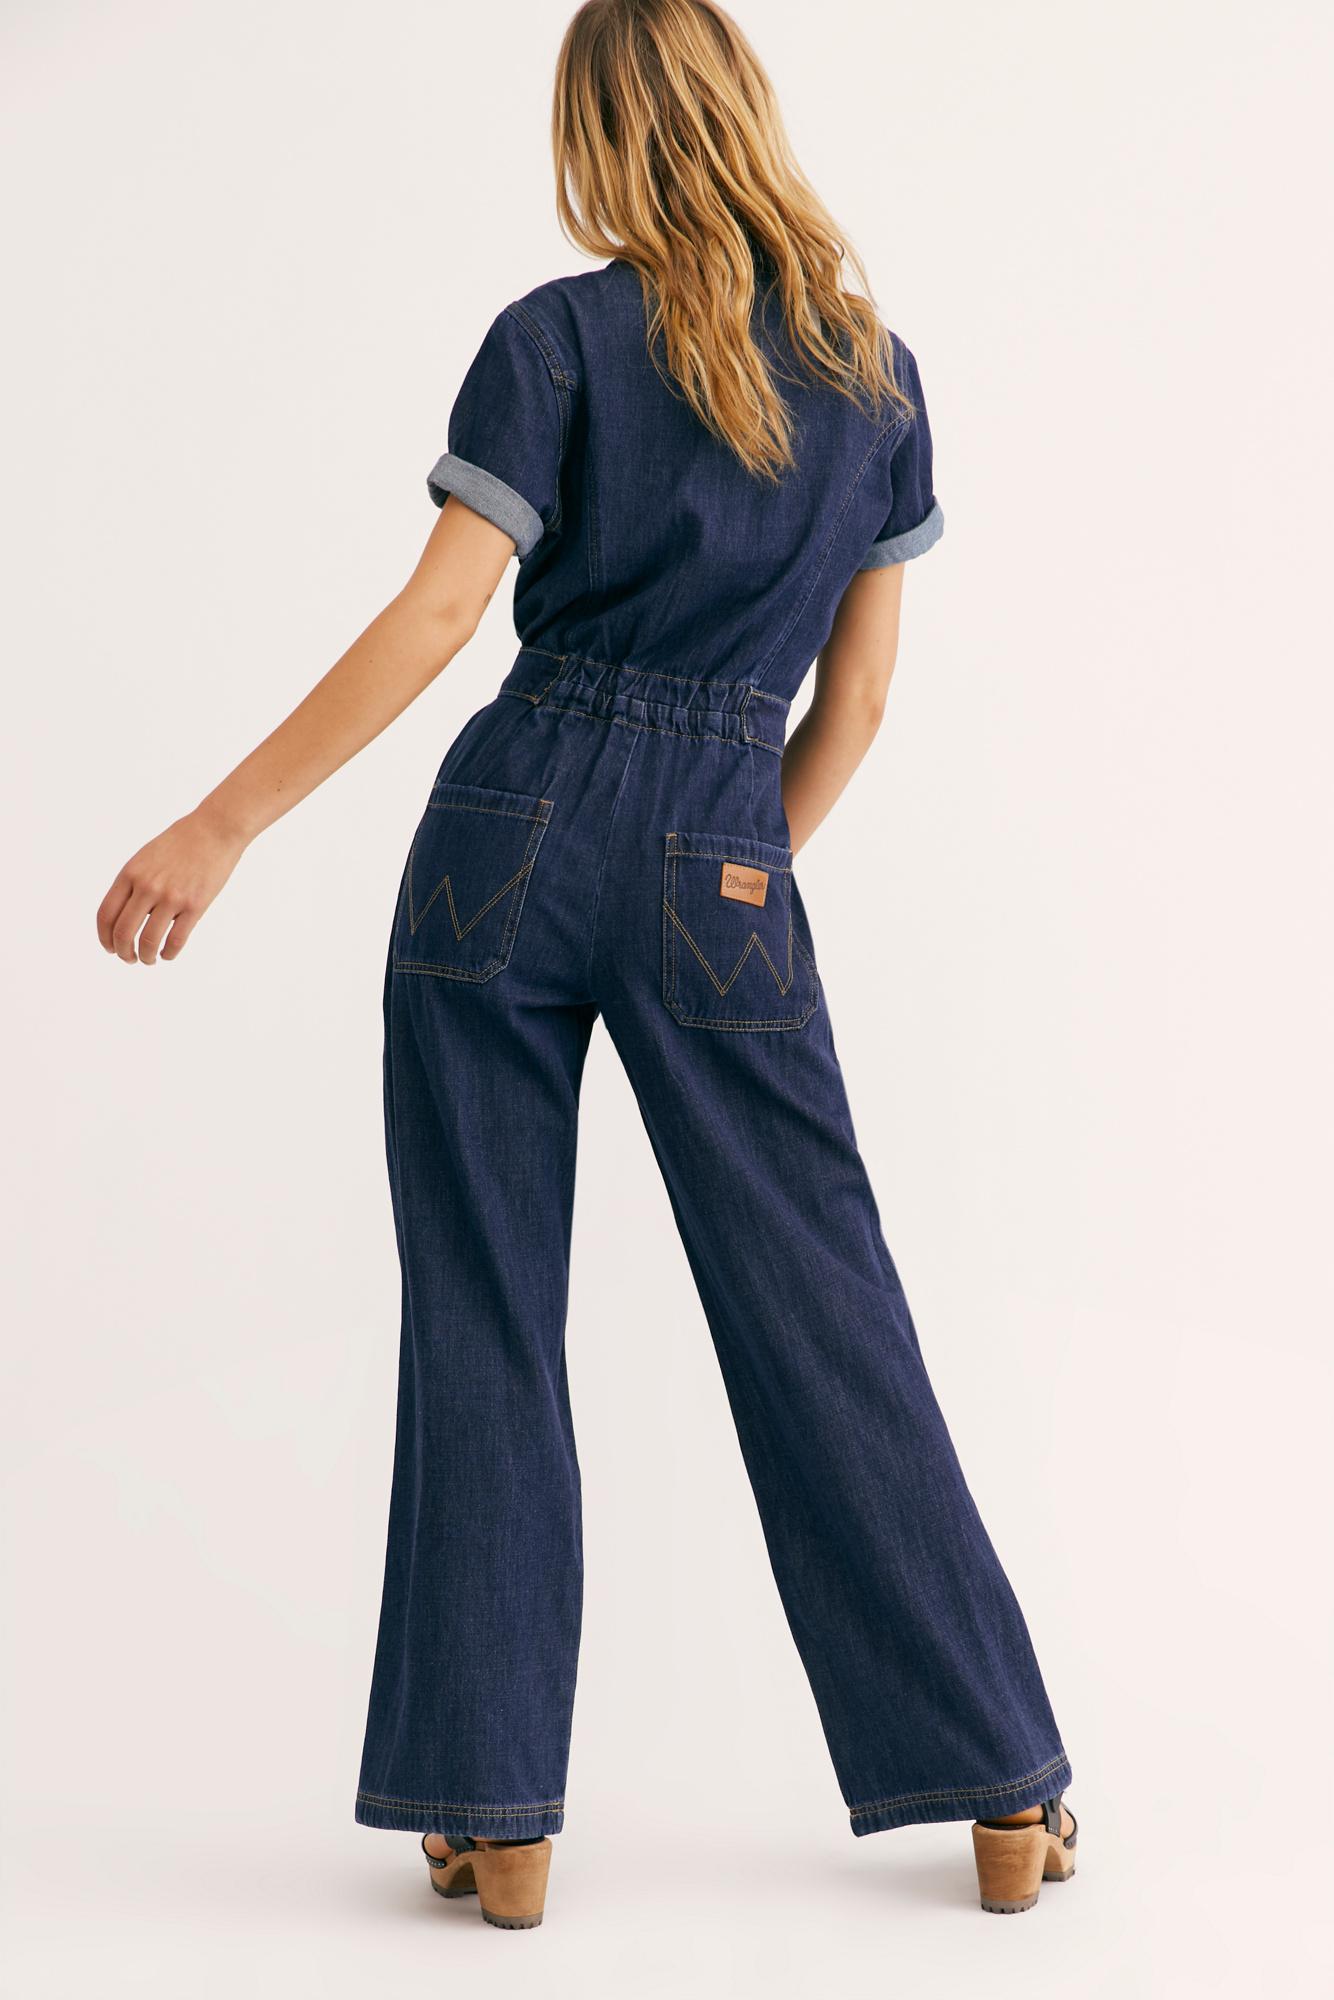 Free People Wrangler Denim Coveralls in Rinse Wash (Blue) - Lyst